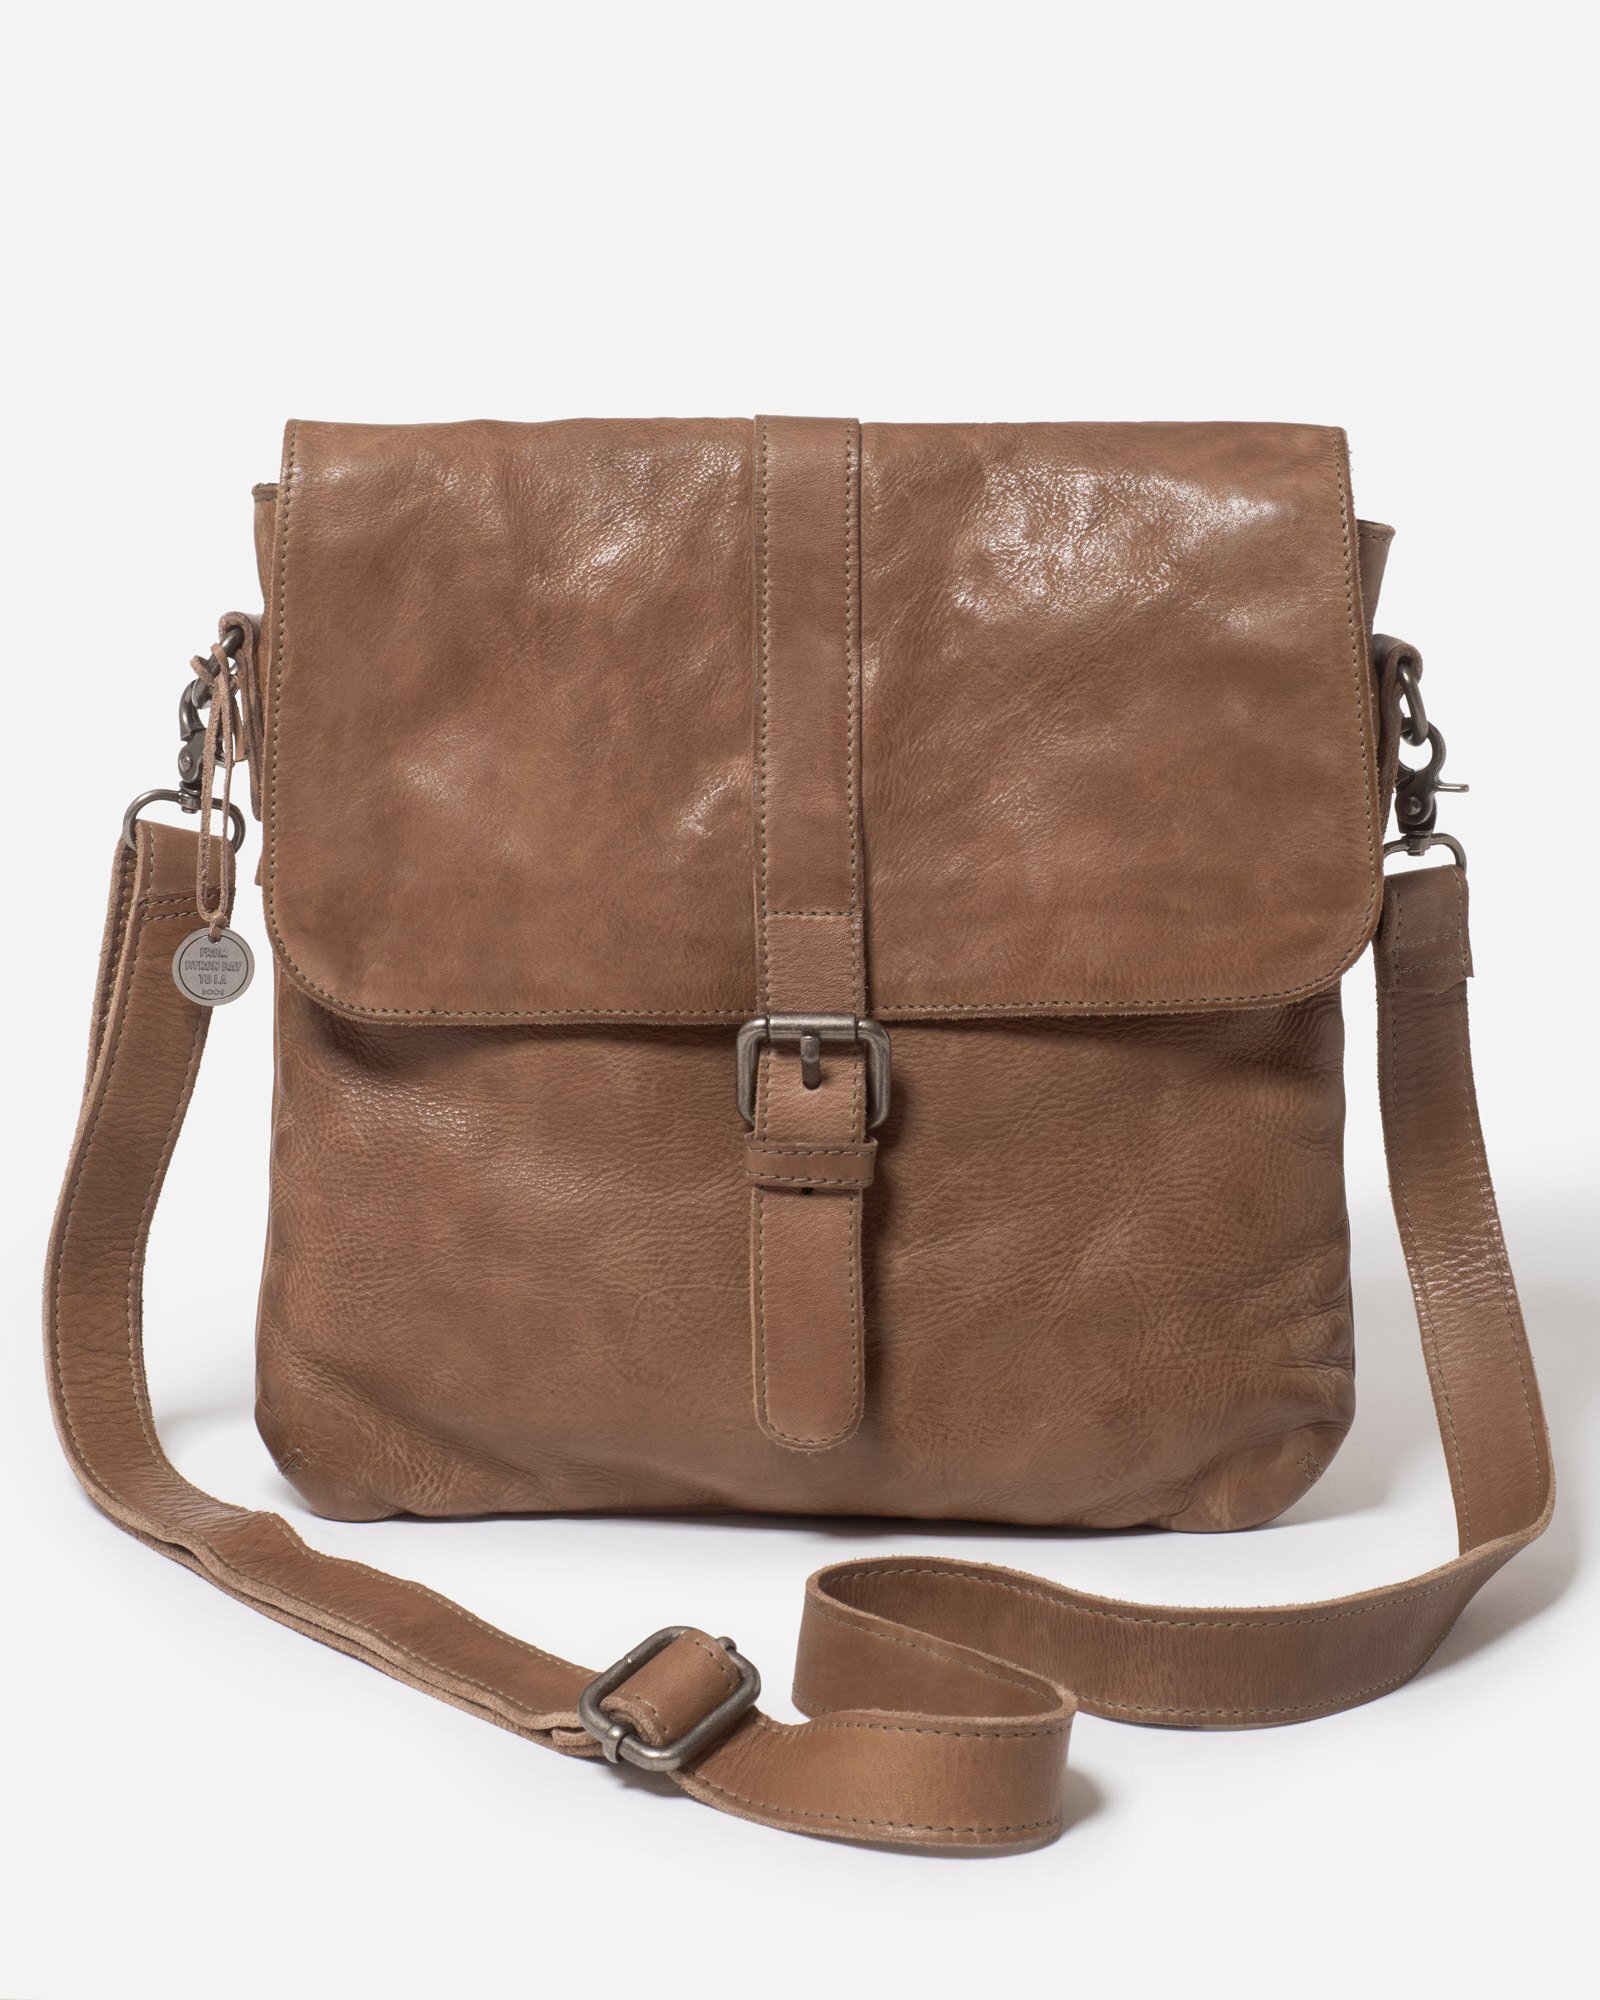 Stitch and Hide BERLIN Bag TAUPE - Accessories-Handbags : Diahann ...